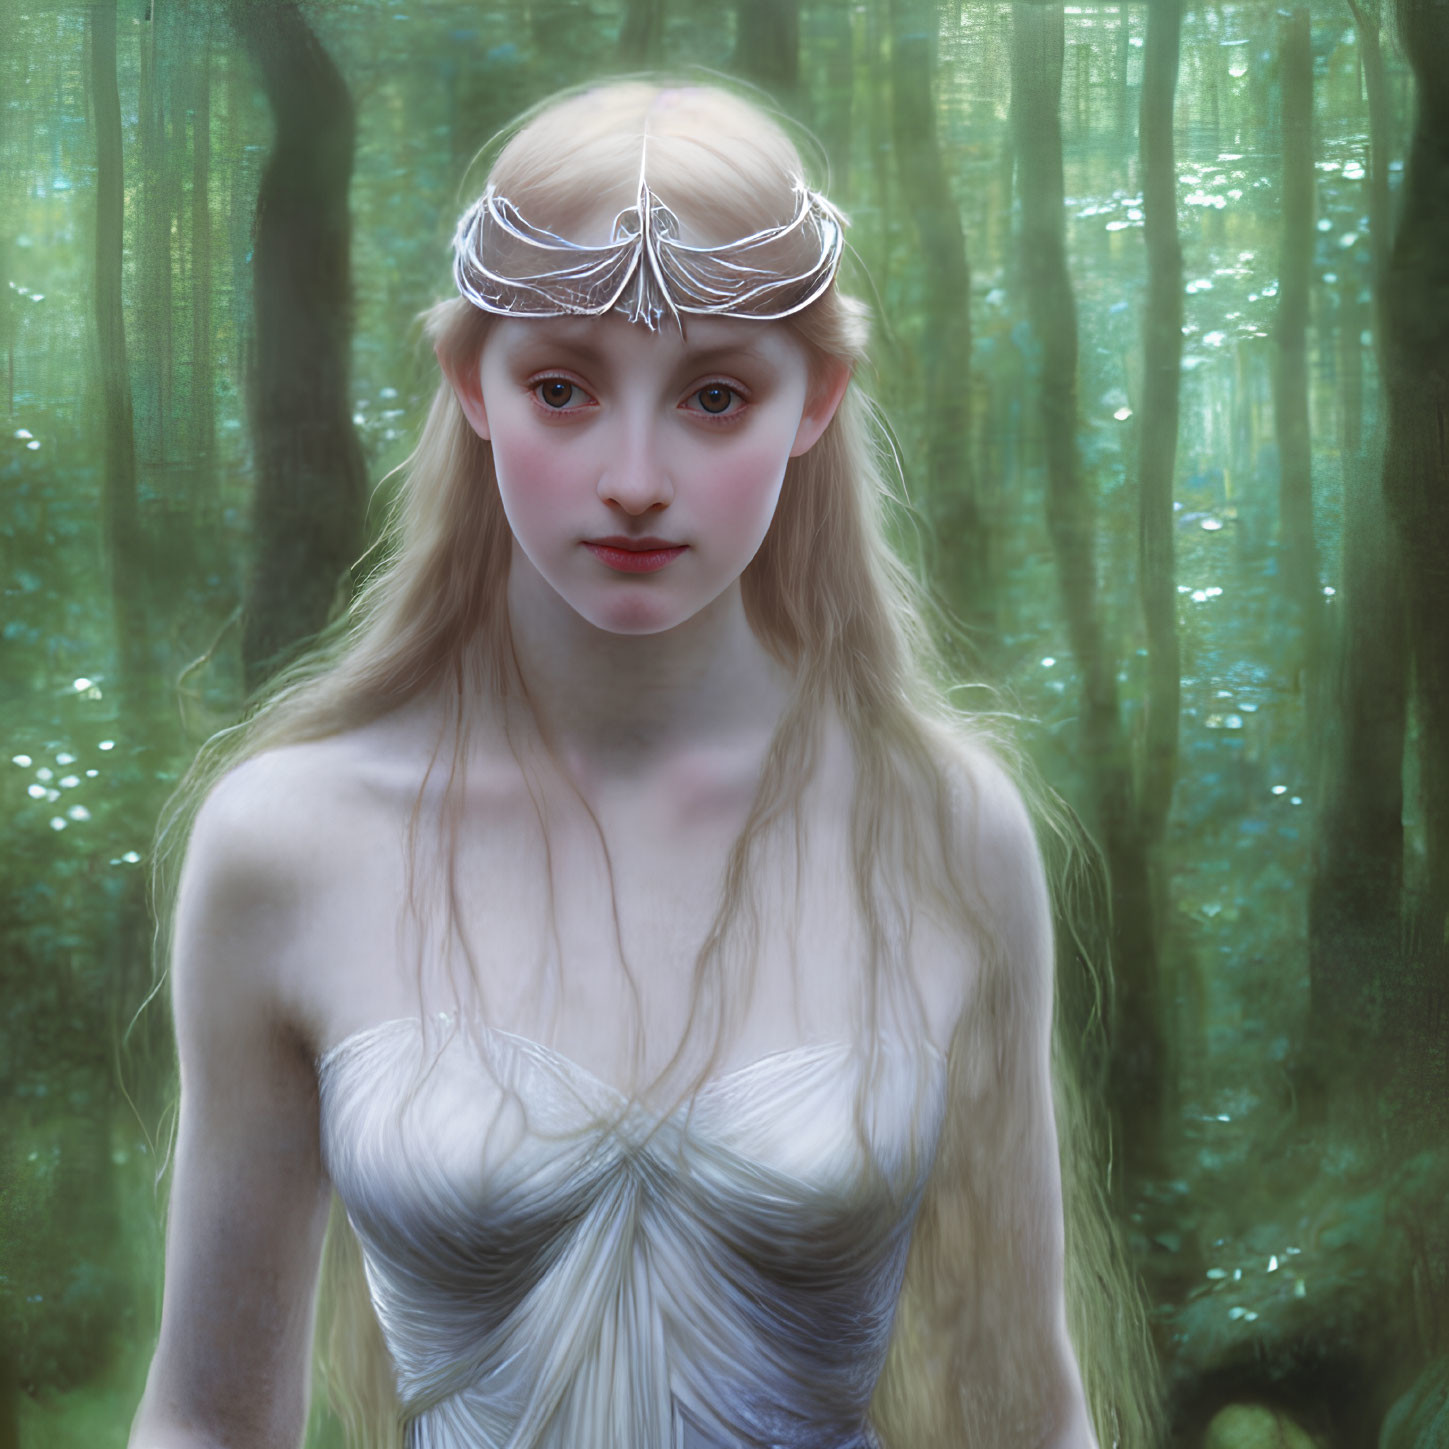 Ethereal woman with blonde hair in enchanted forest